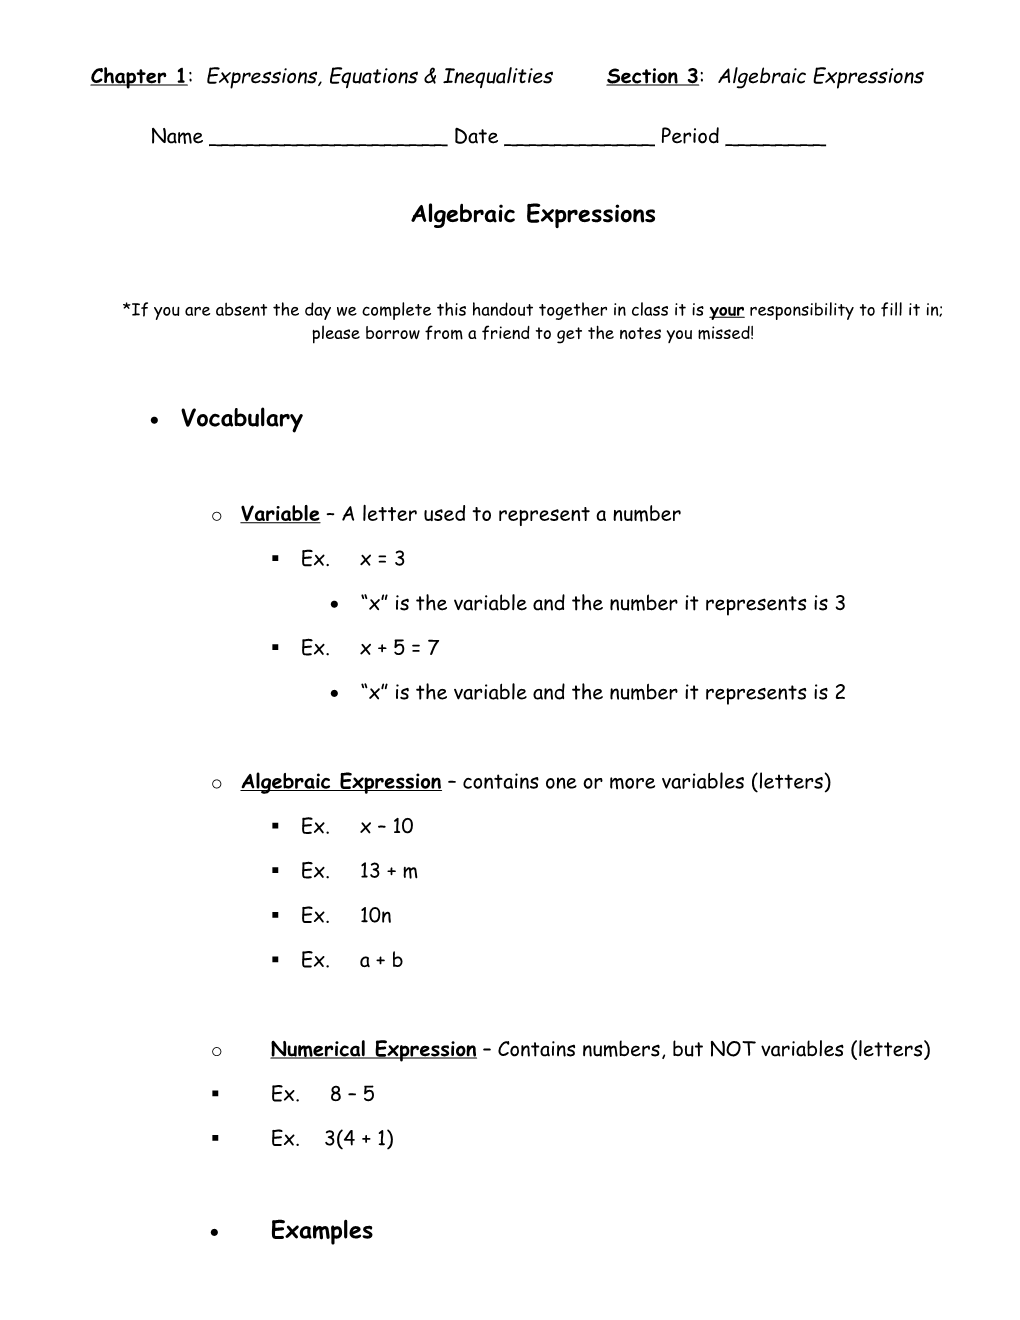 Chapter 1: Expressions, Equations & Inequalities Section 3: Algebraic Expressions